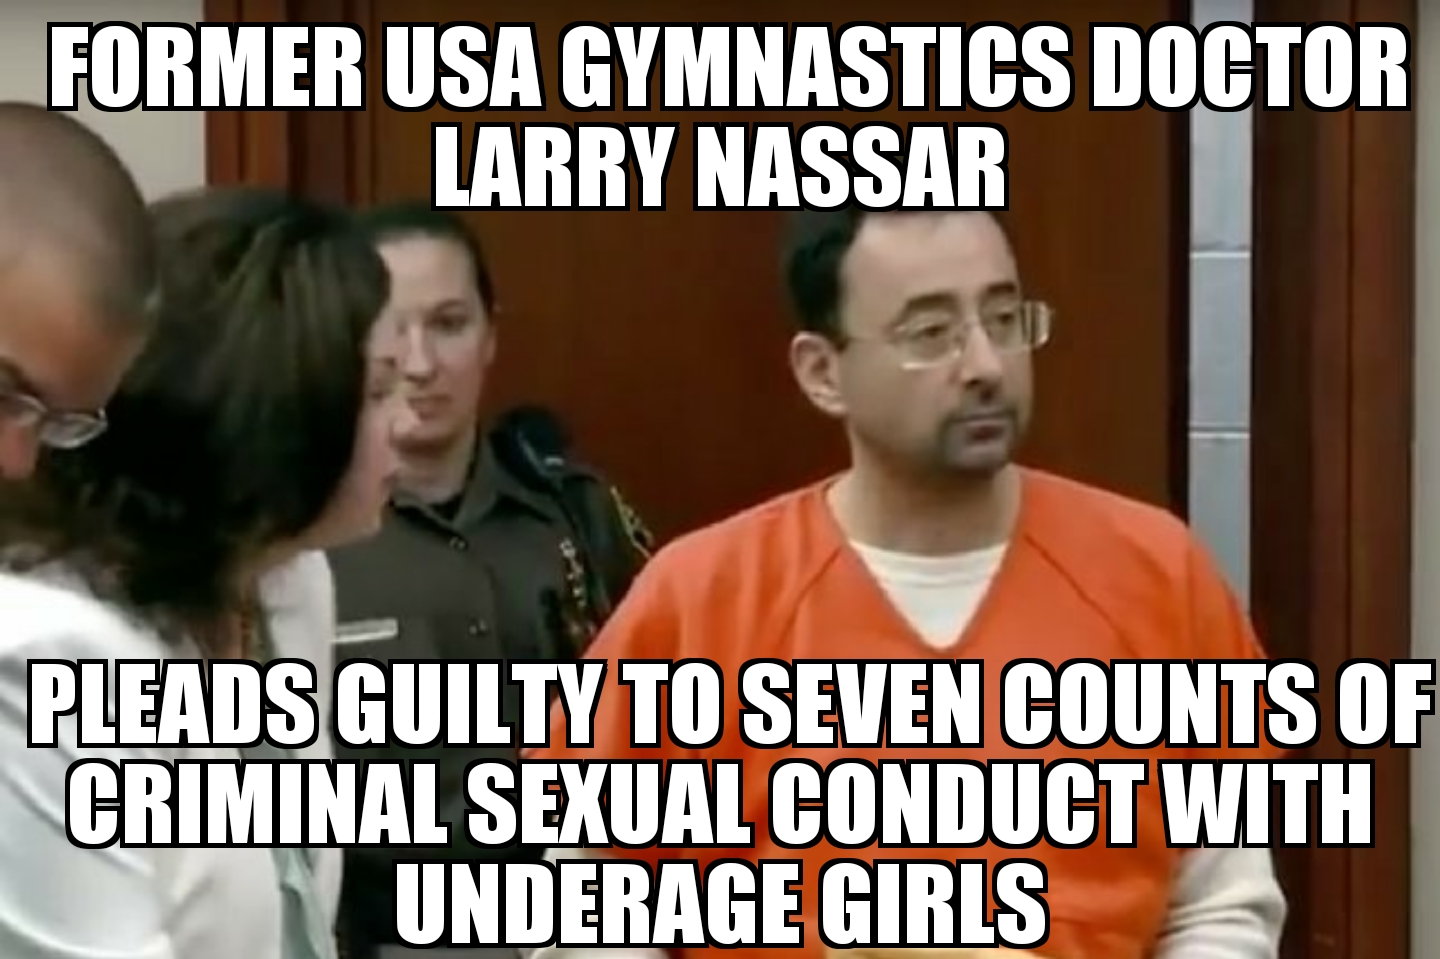 Ex-USA gymnastics doctor pleads guilty to criminal sexual conduct